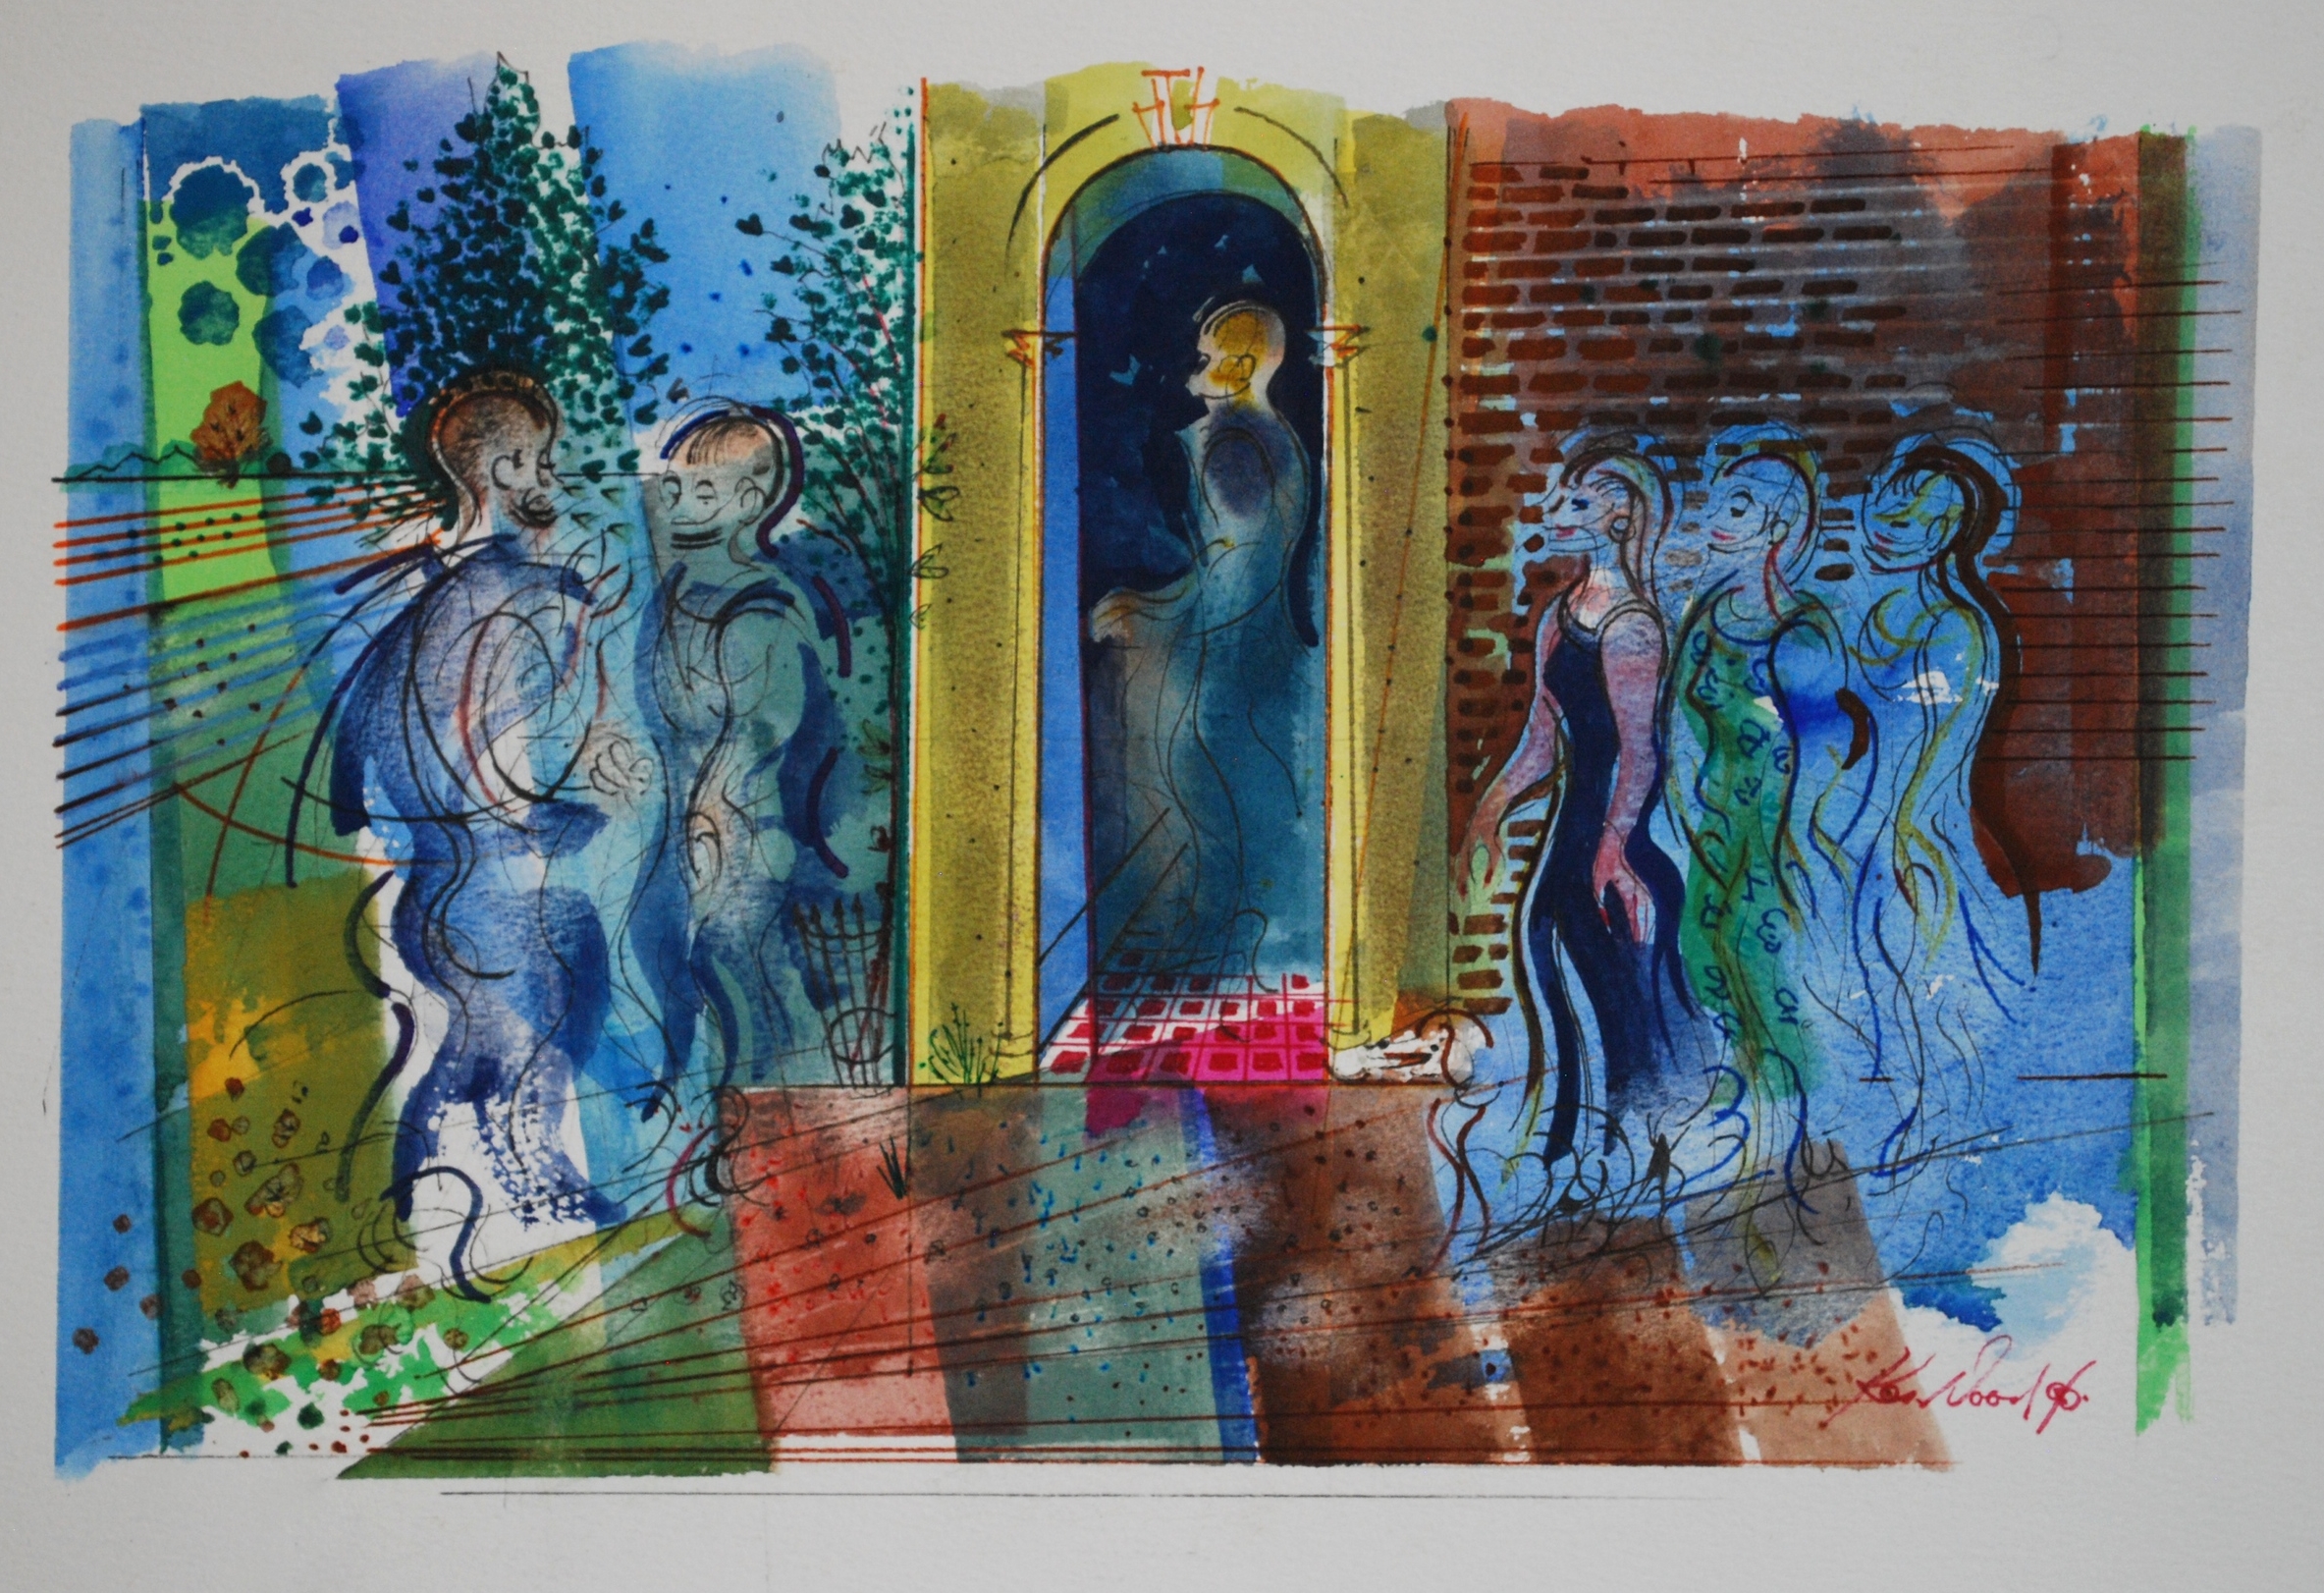  Figures with Archway&nbsp;1996 Watercolour &nbsp;37 x 25 cm 